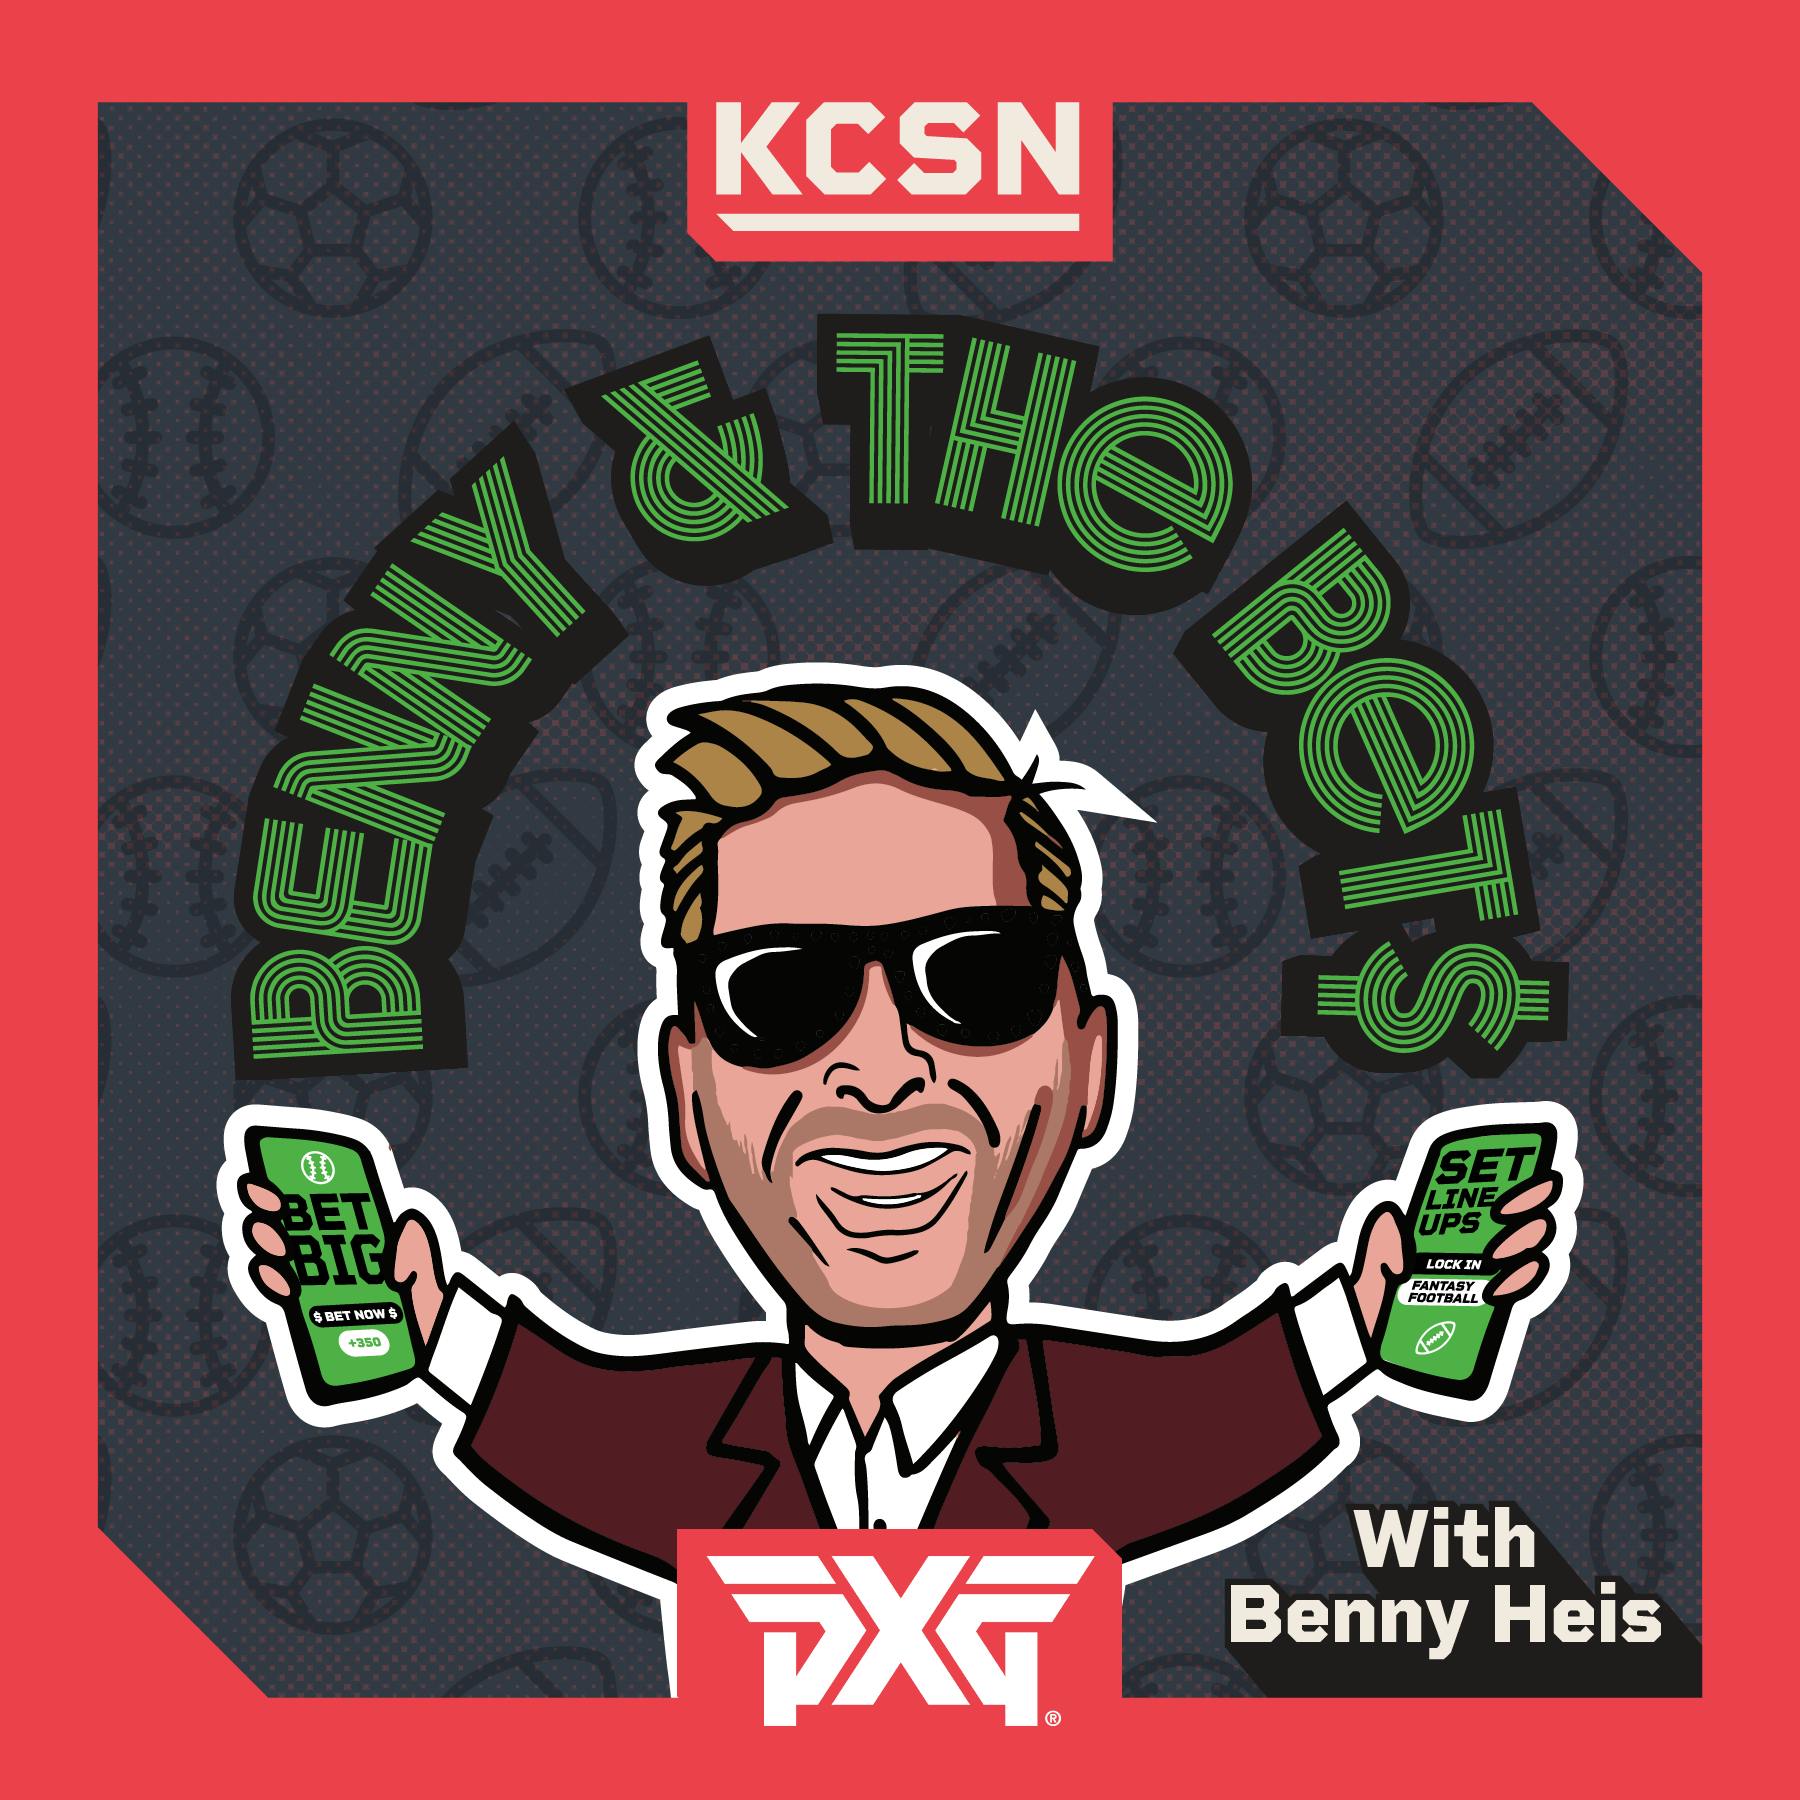 Benny and the Bets 7/22: Breaking Down 2023 NFL Futures Bets with Sam Wagman